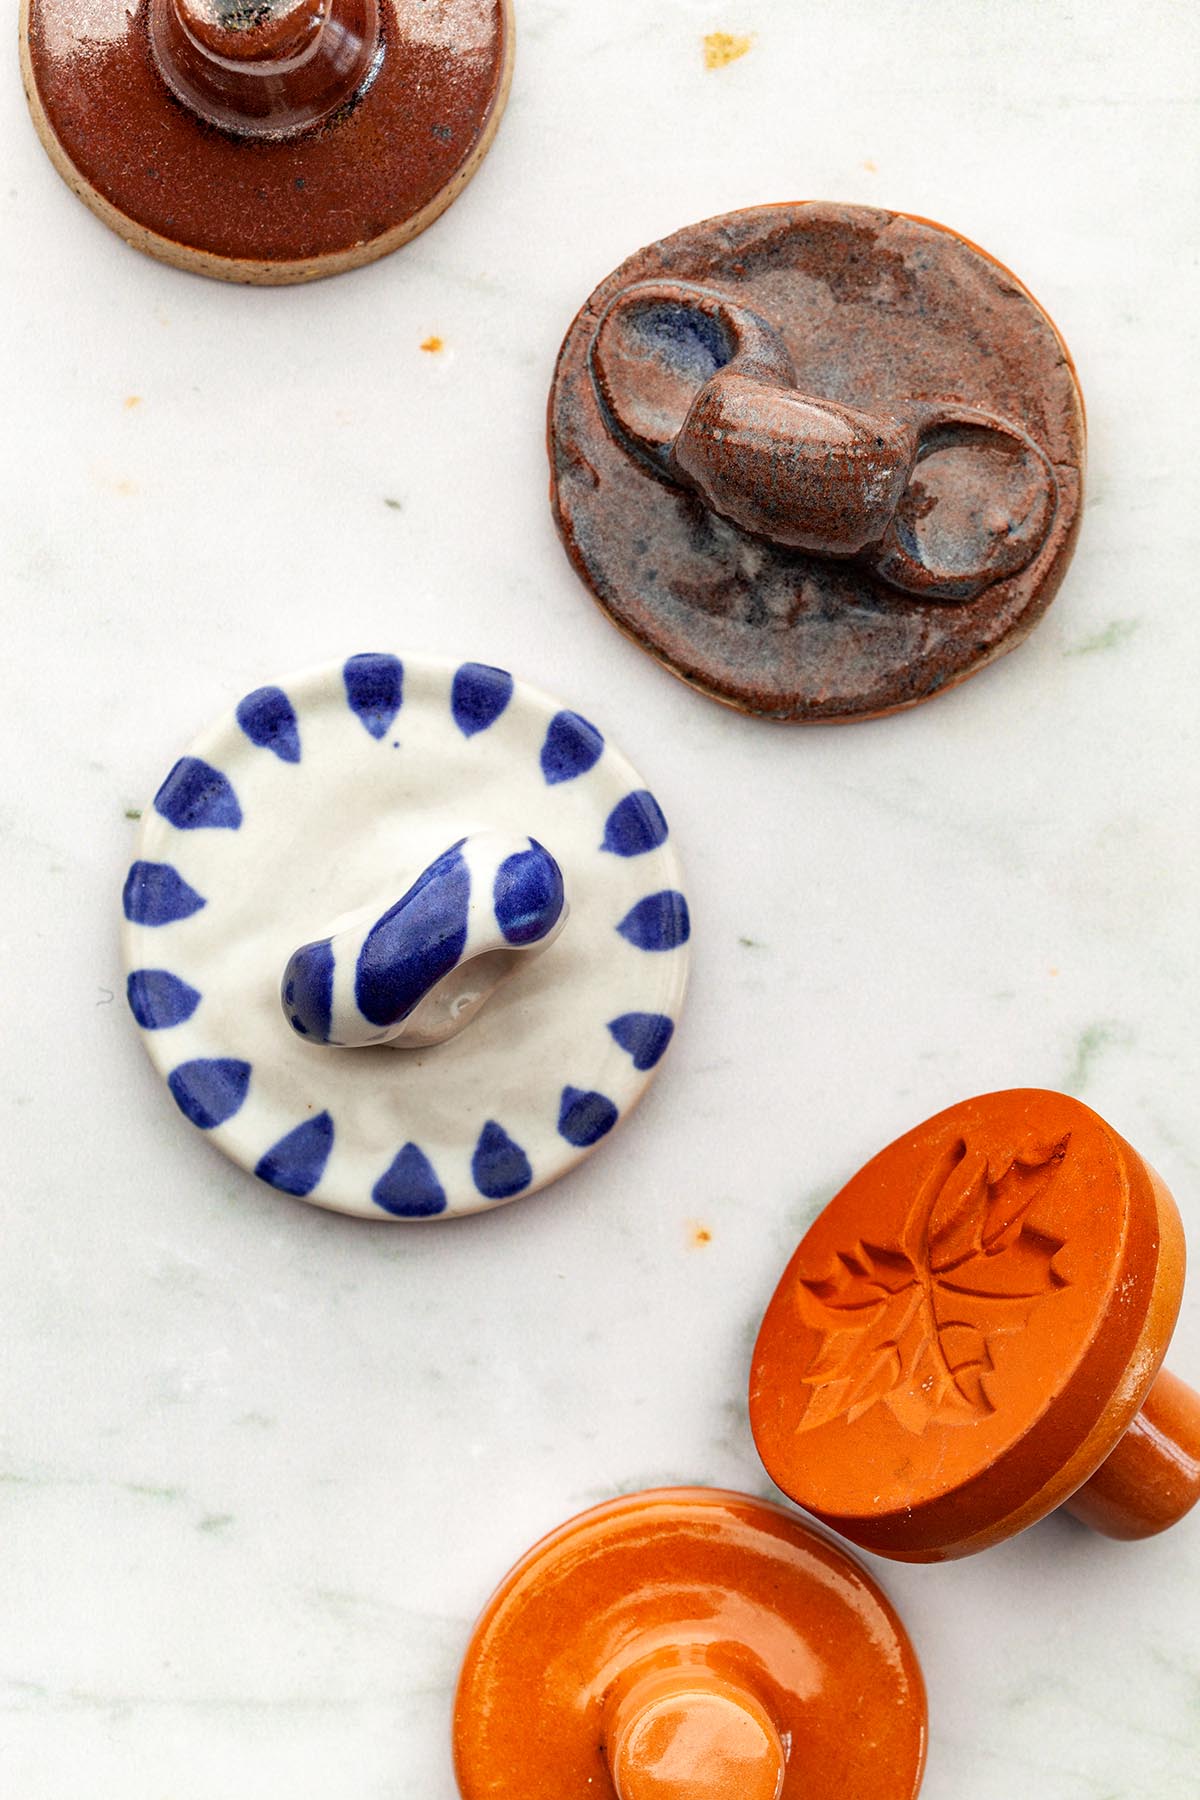 A thistle shortbread stamp and other ceramic cookie stamps laying down on a marble surface.